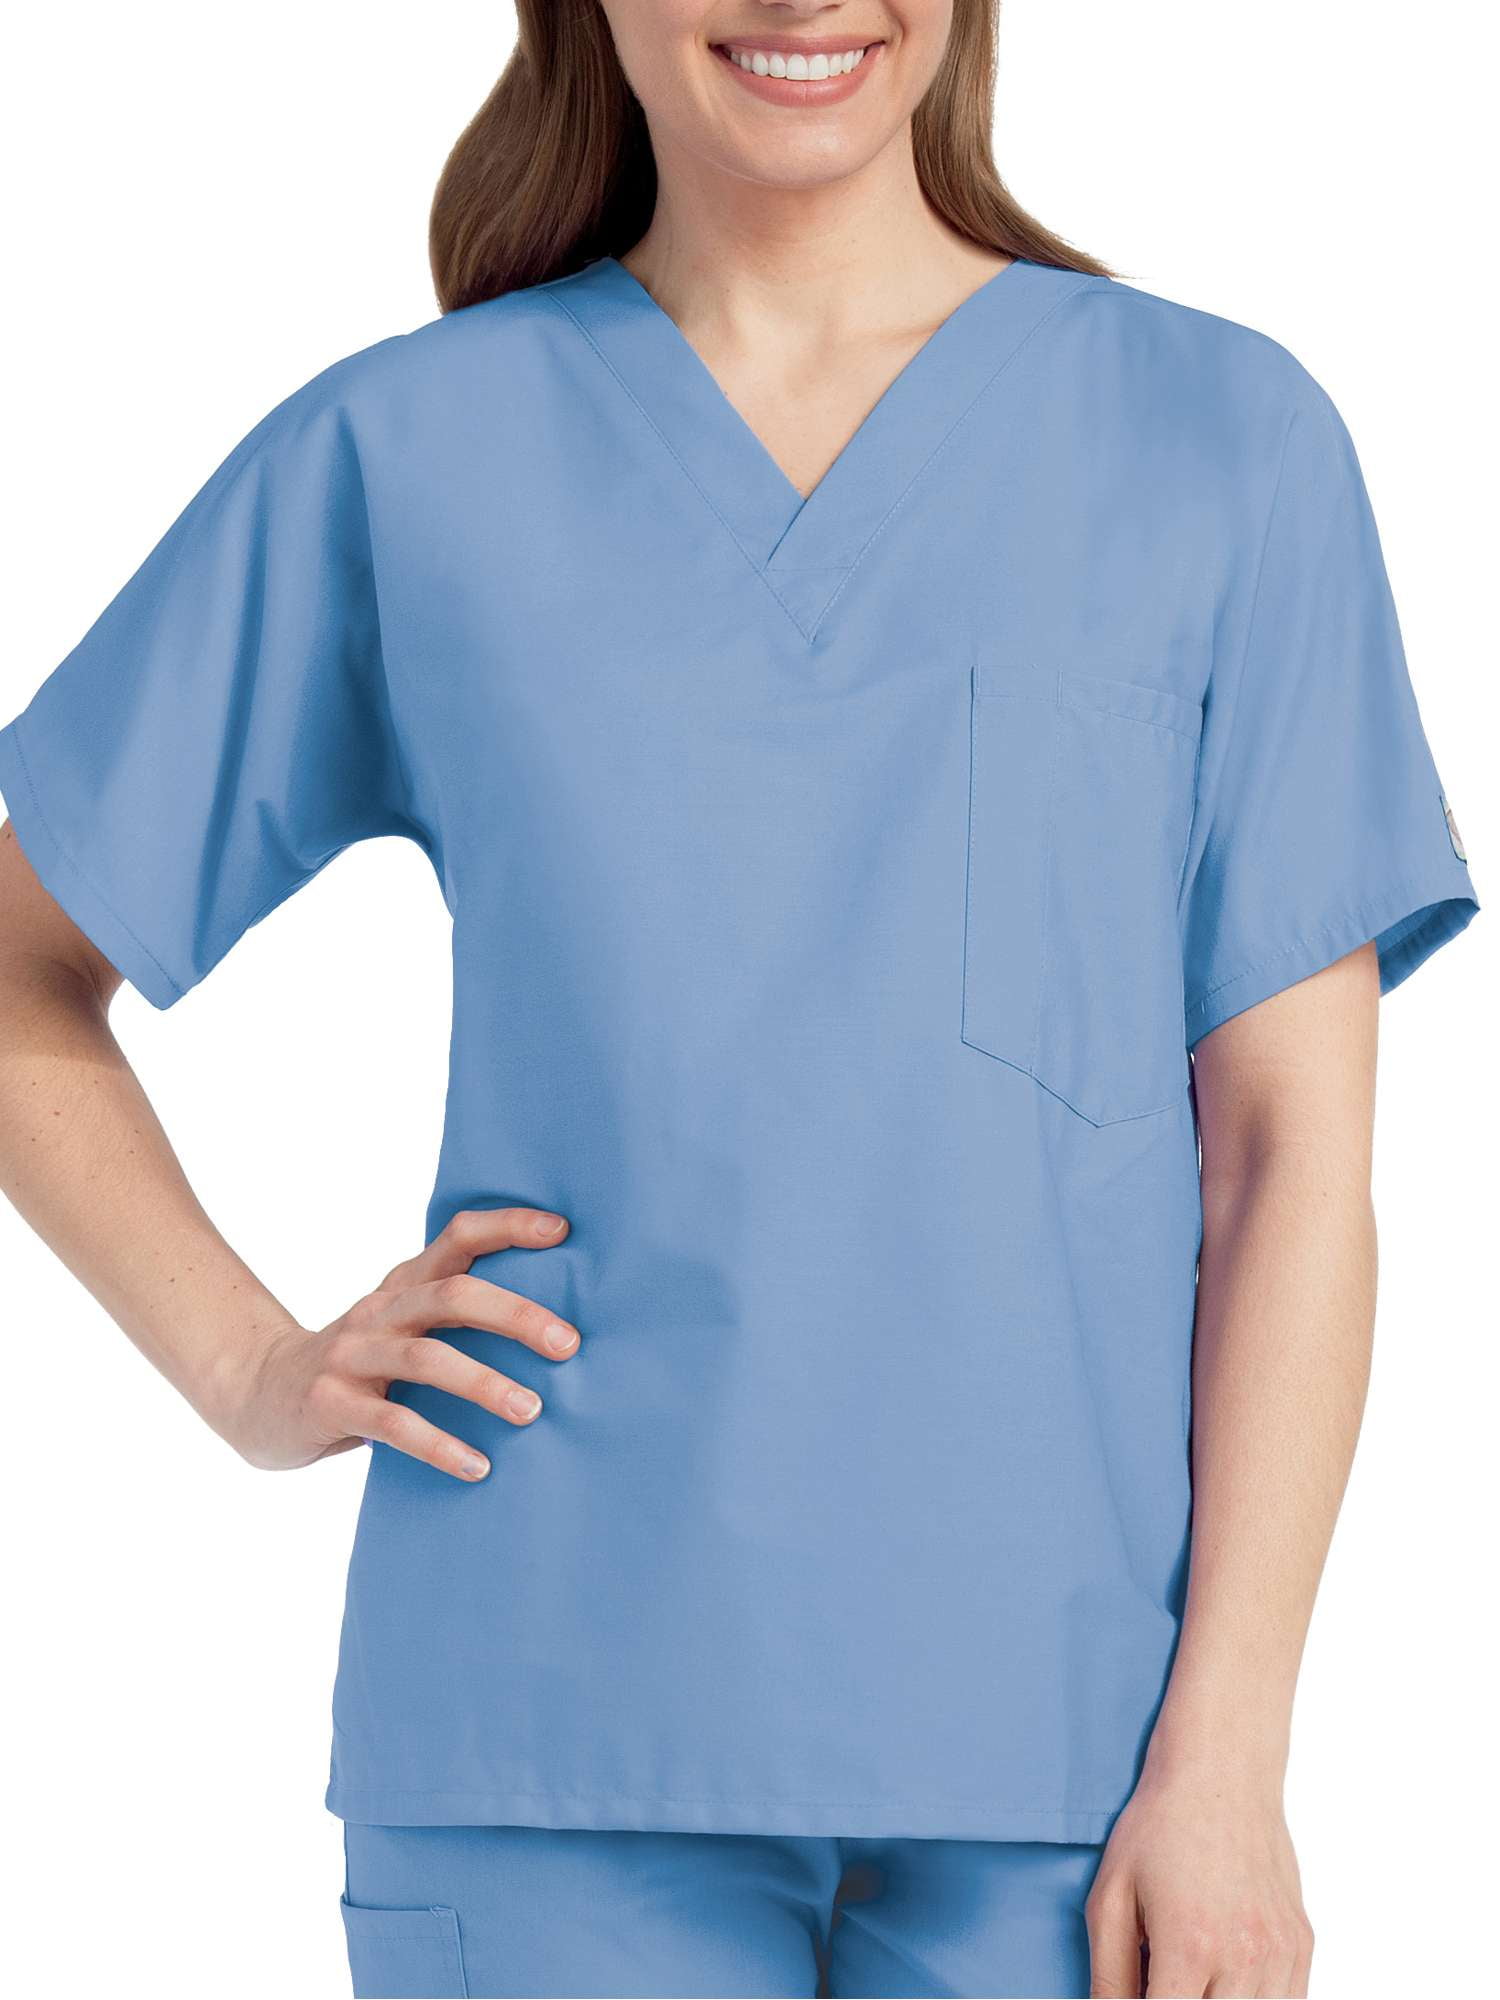 Green Hospital Scrubs By Encompass Tops Or Pants Medical Nursing Surgical Unisex